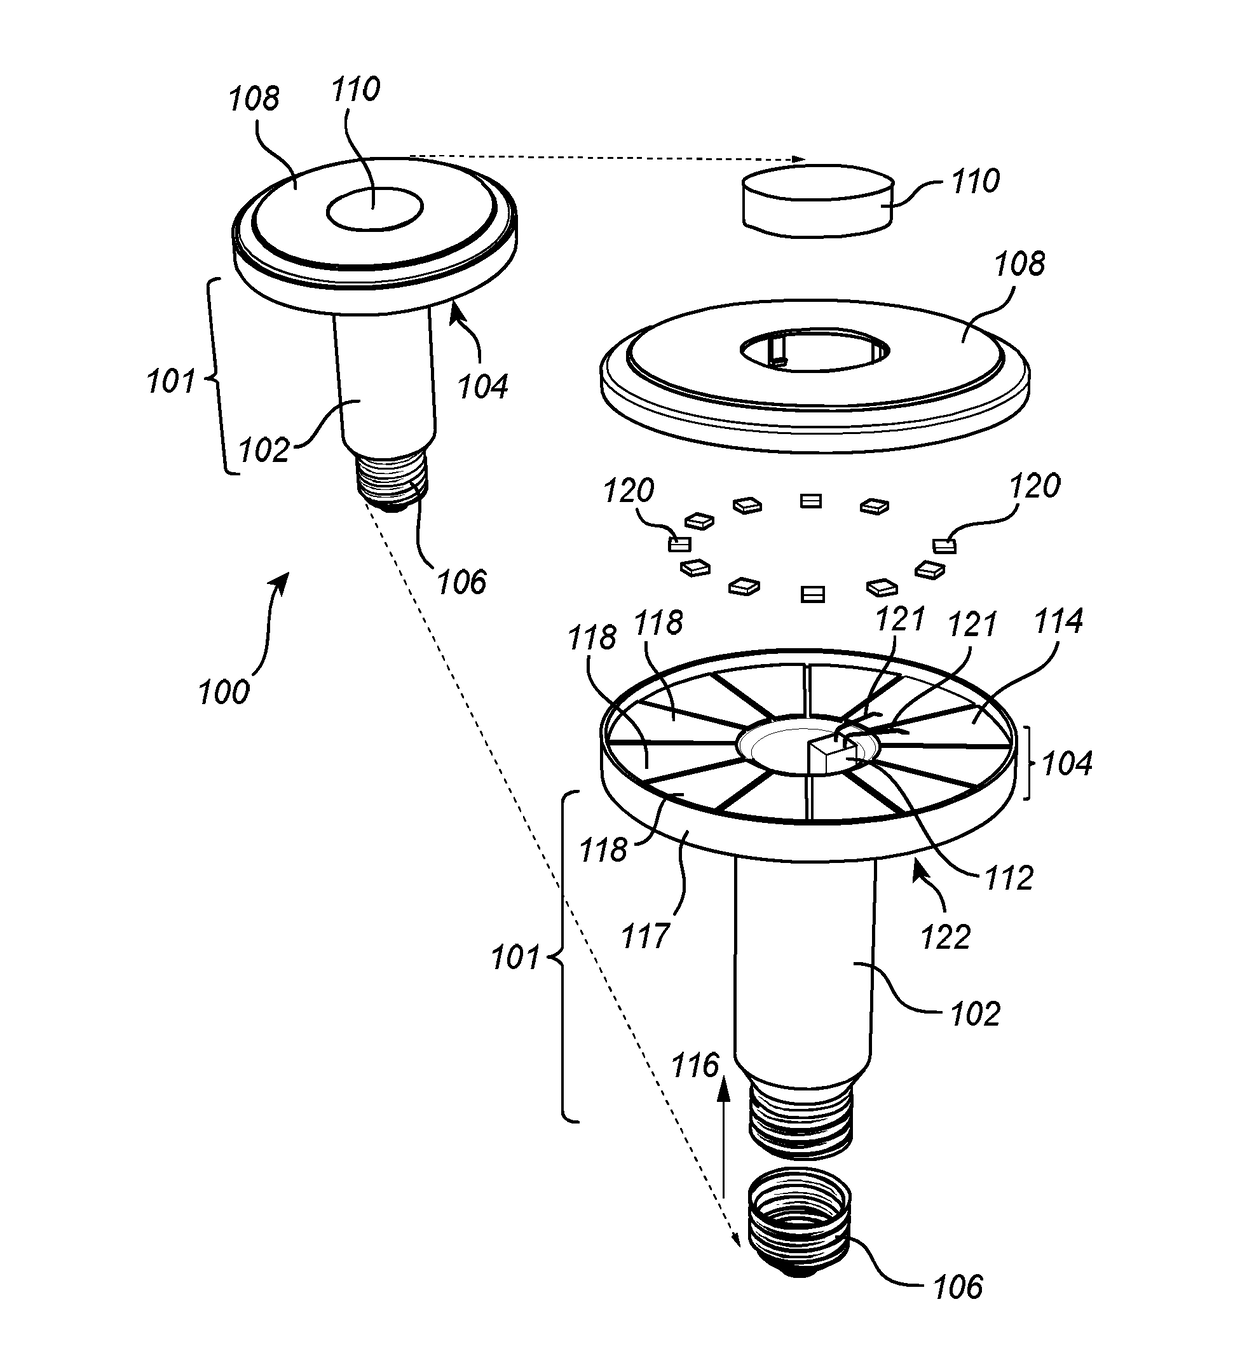 Lighting device with an improved housing